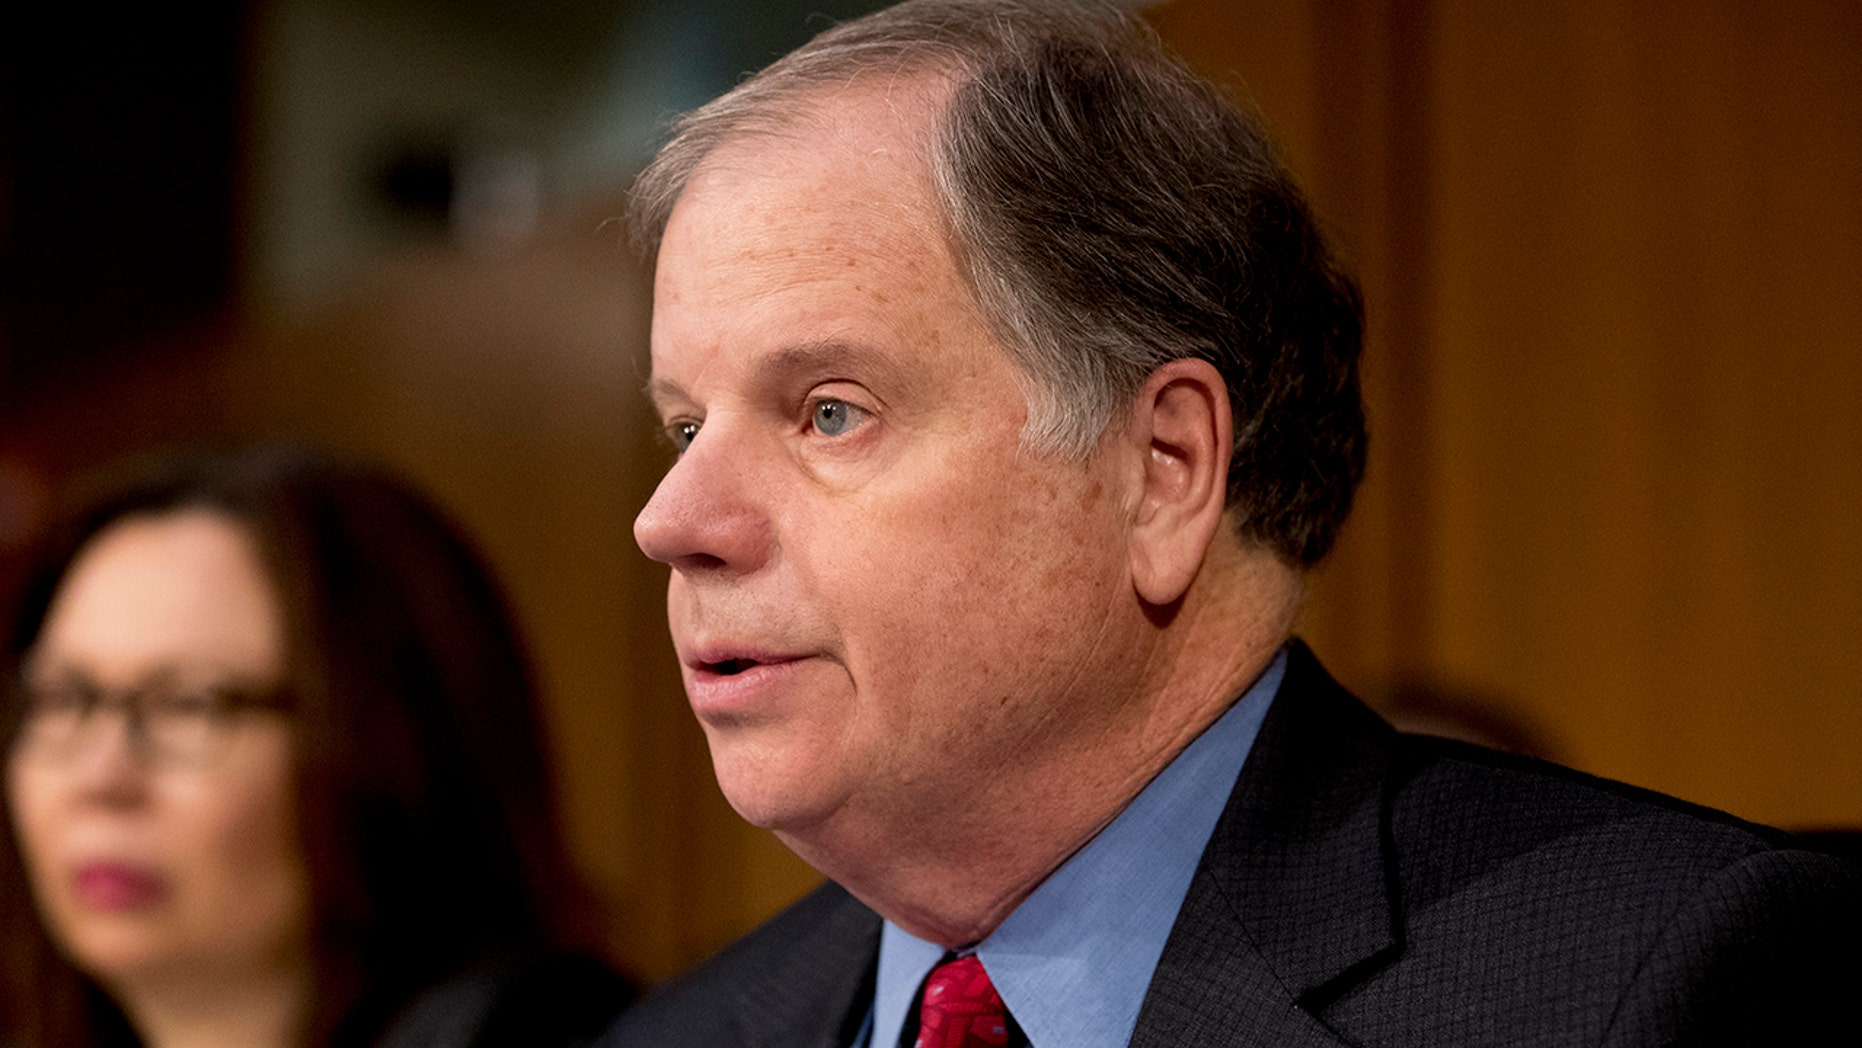 Senator Doug Jones, Algerian, has called for the resignation of the editor of a small newspaper after publishing a column asking the Klan to come back.